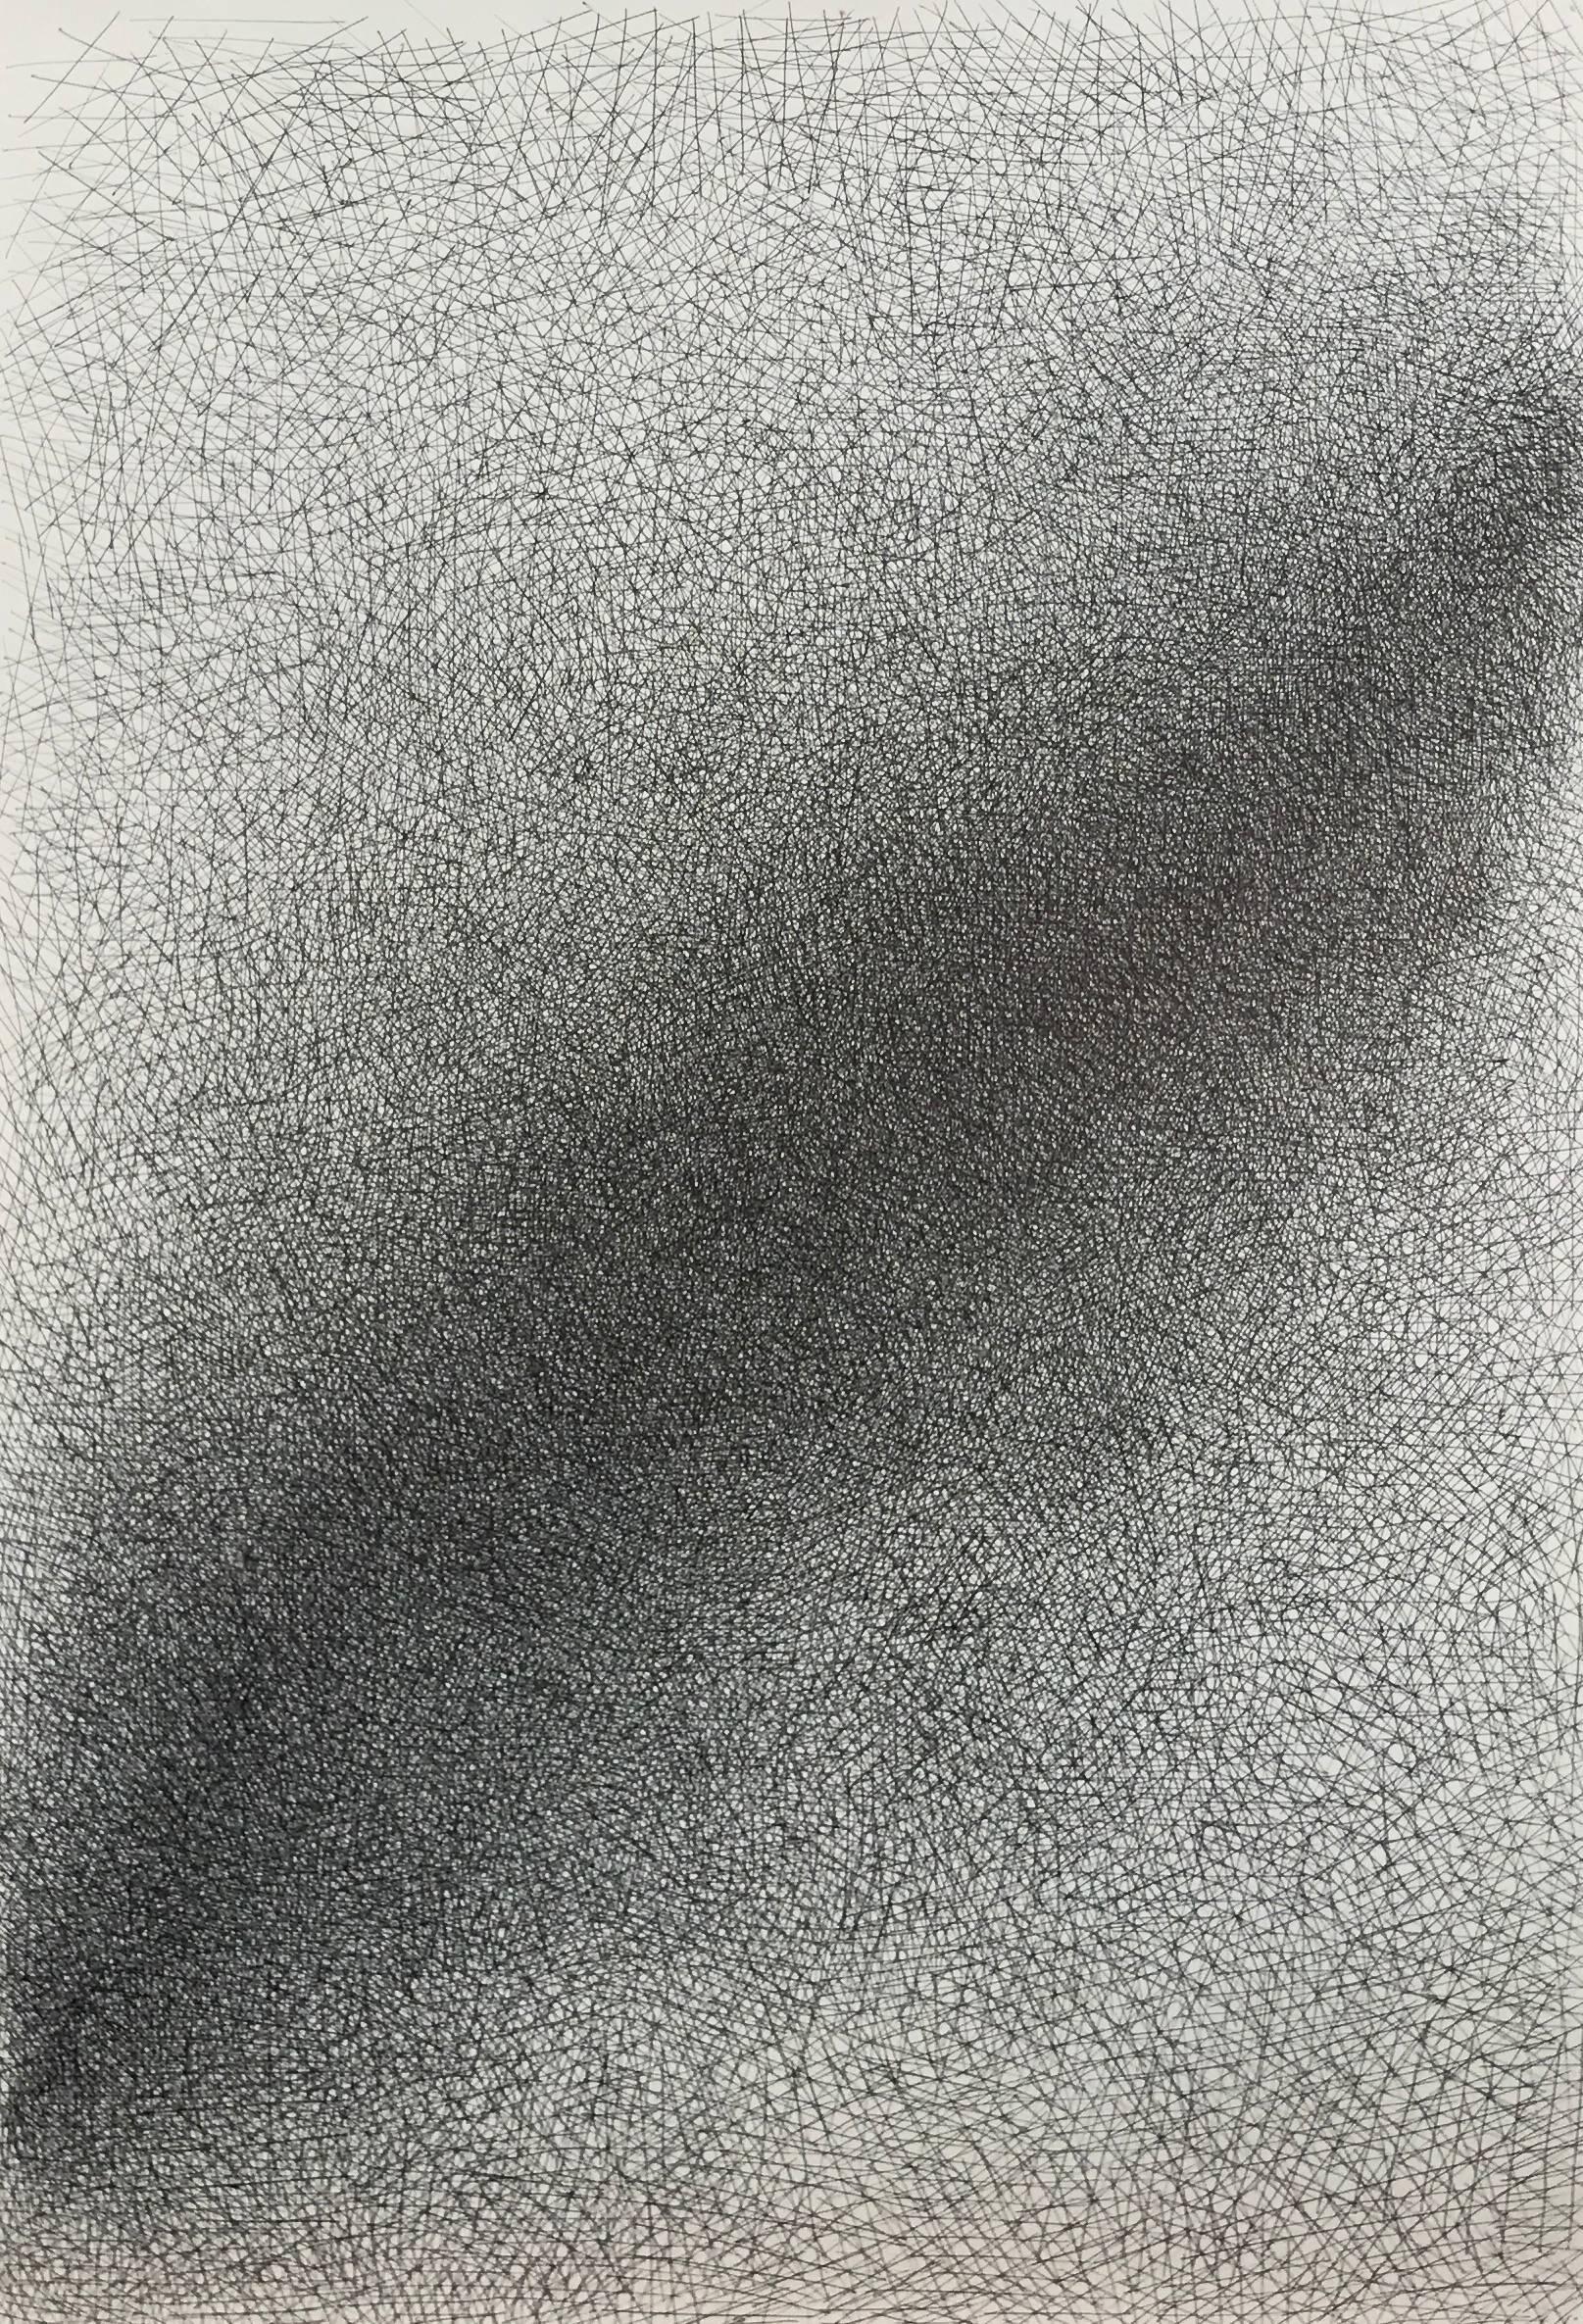 Matilde Alessandra Abstract Drawing - Untitled #2